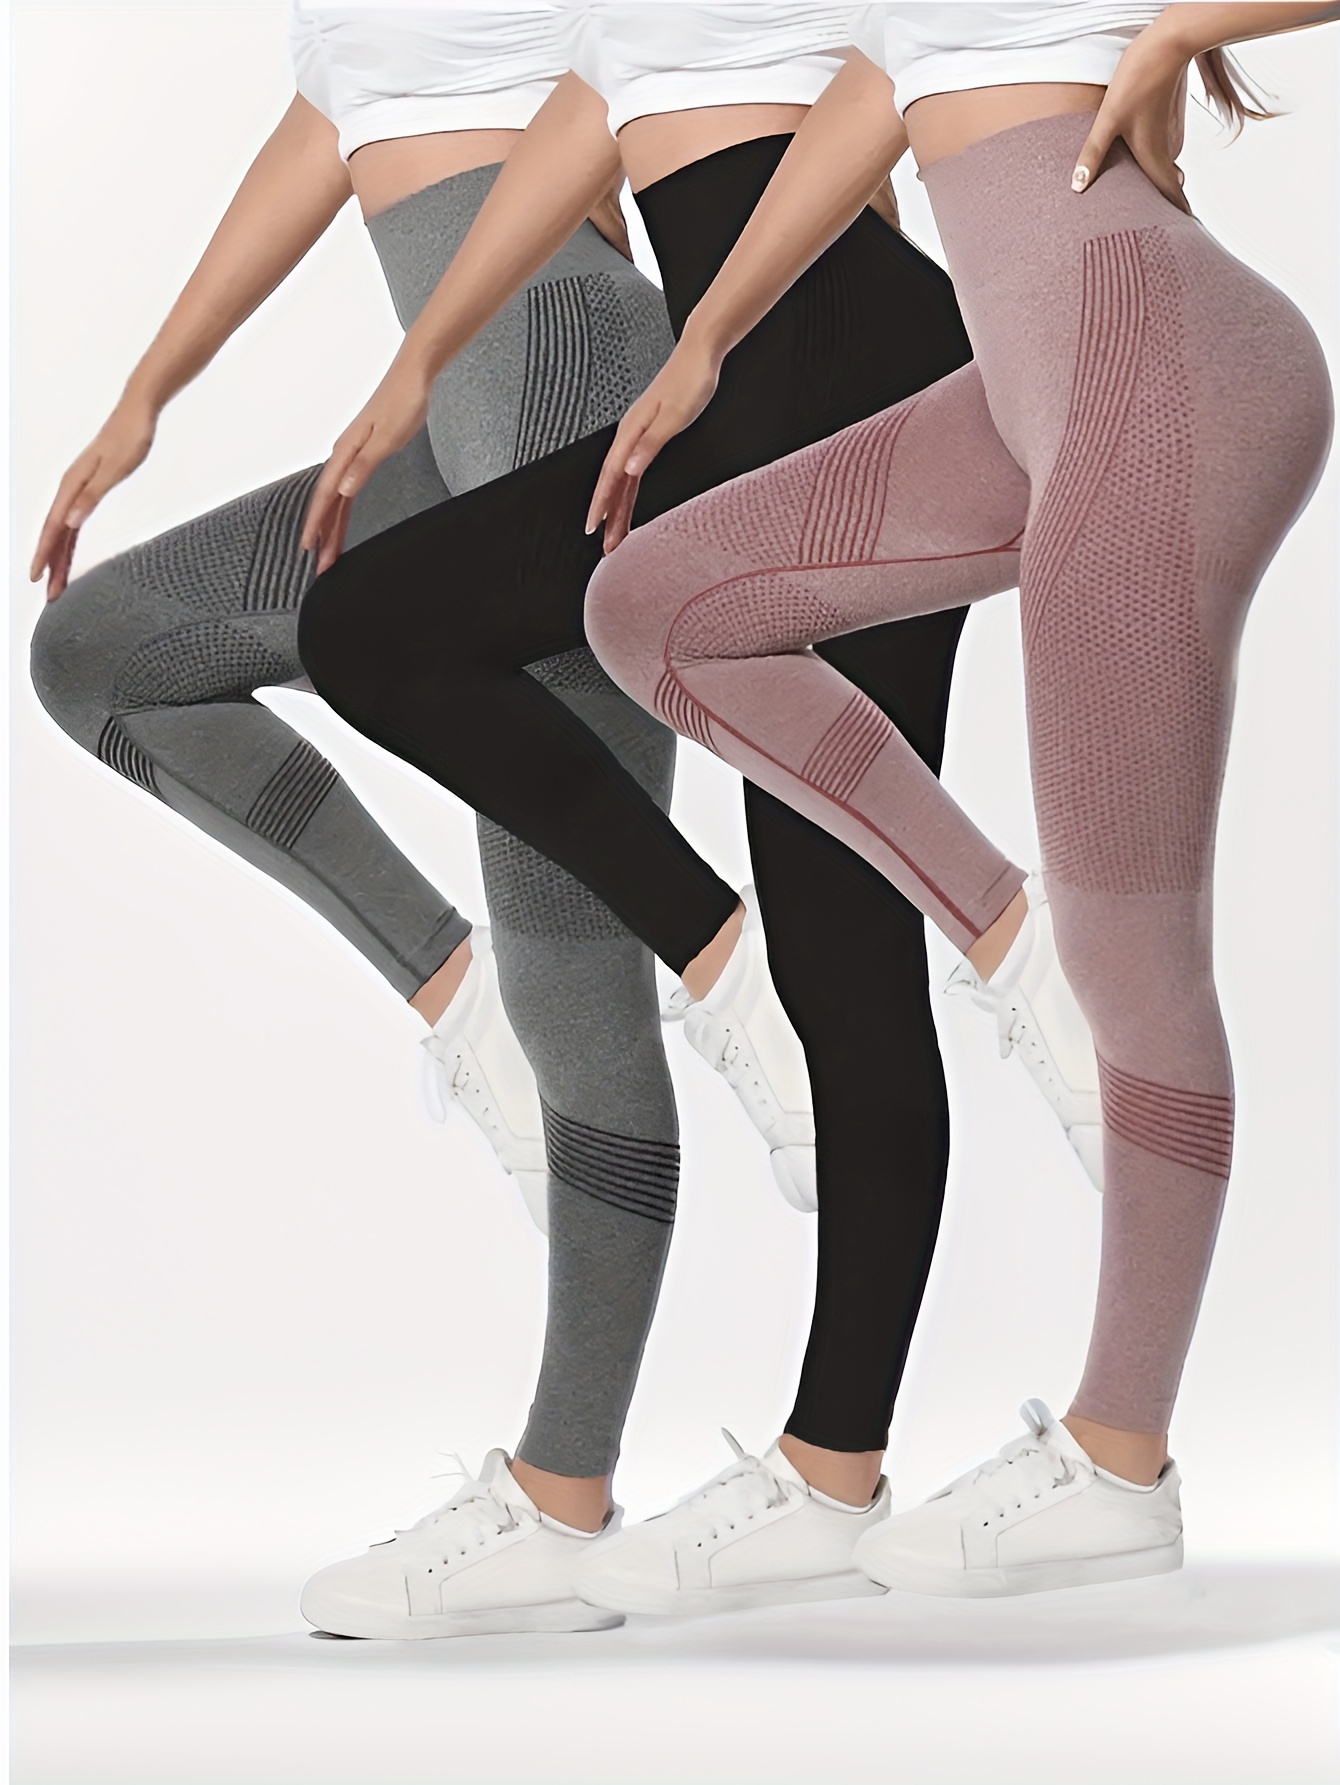 Fleece Lined Leggings For Women, High Waisted Tummy Control Yoga Pants Non- See-Through Workout Running Warm Legging, Women's Activewear